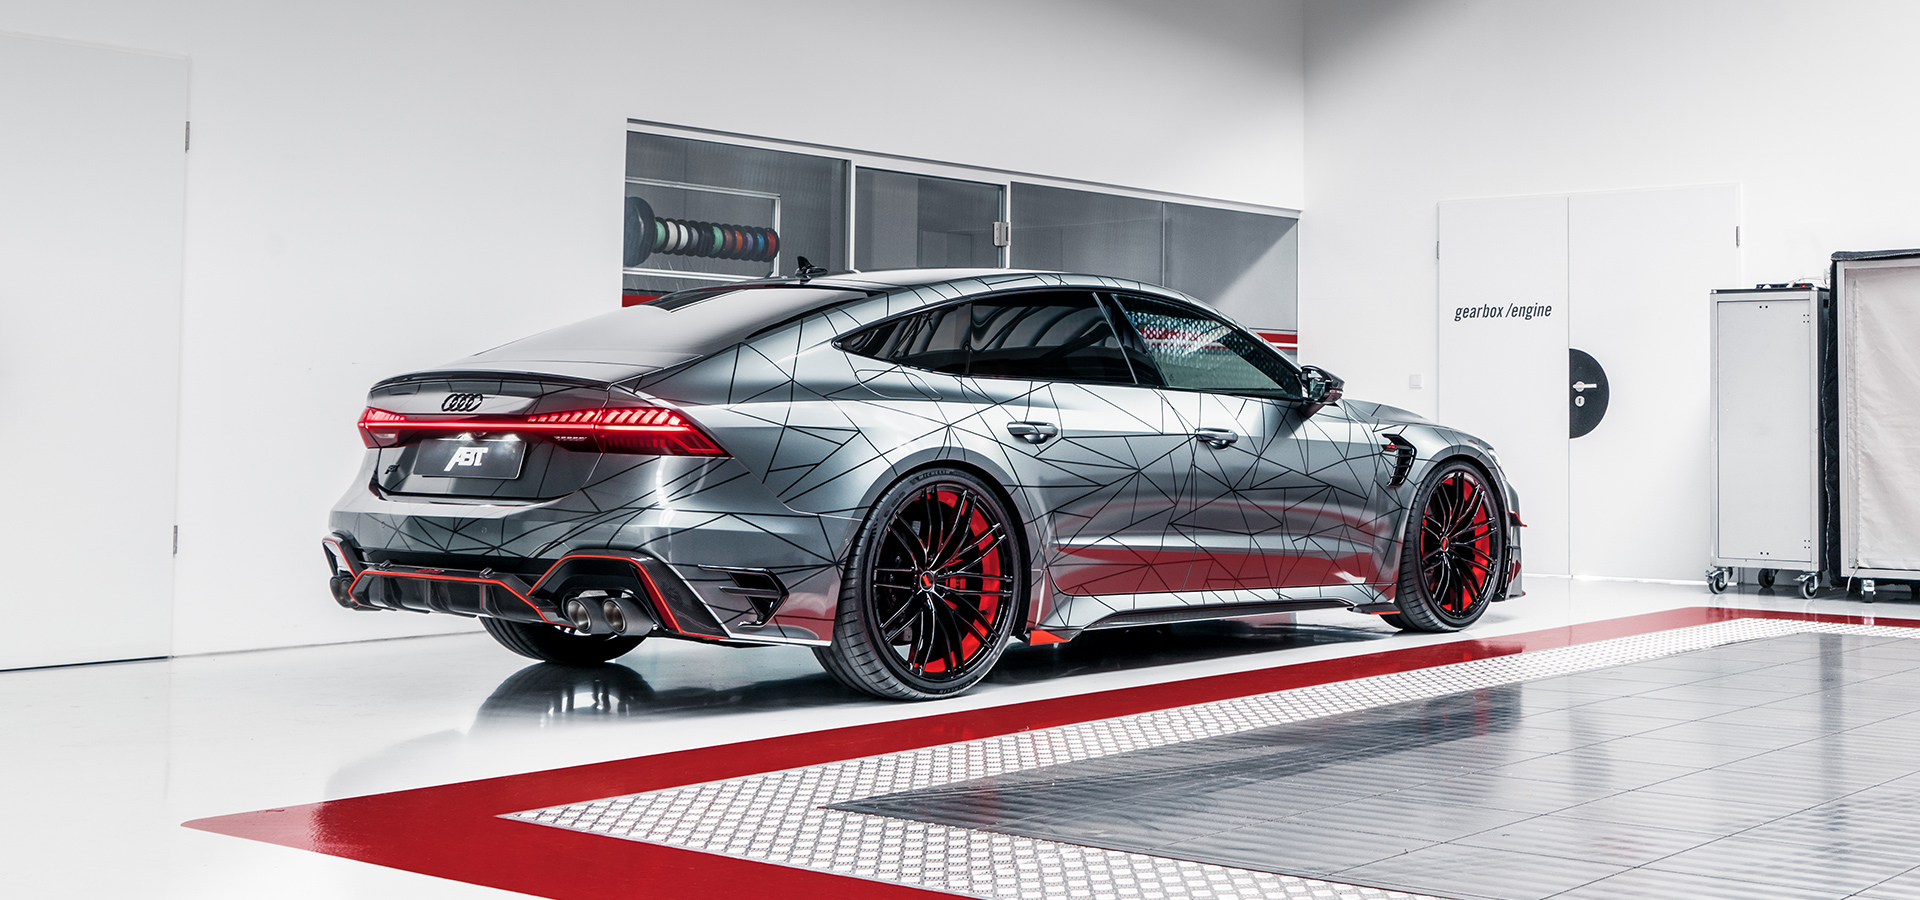 Abt Rs7 R Audi Tuning Vw Tuning Chiptuning Von Abt Sportsline